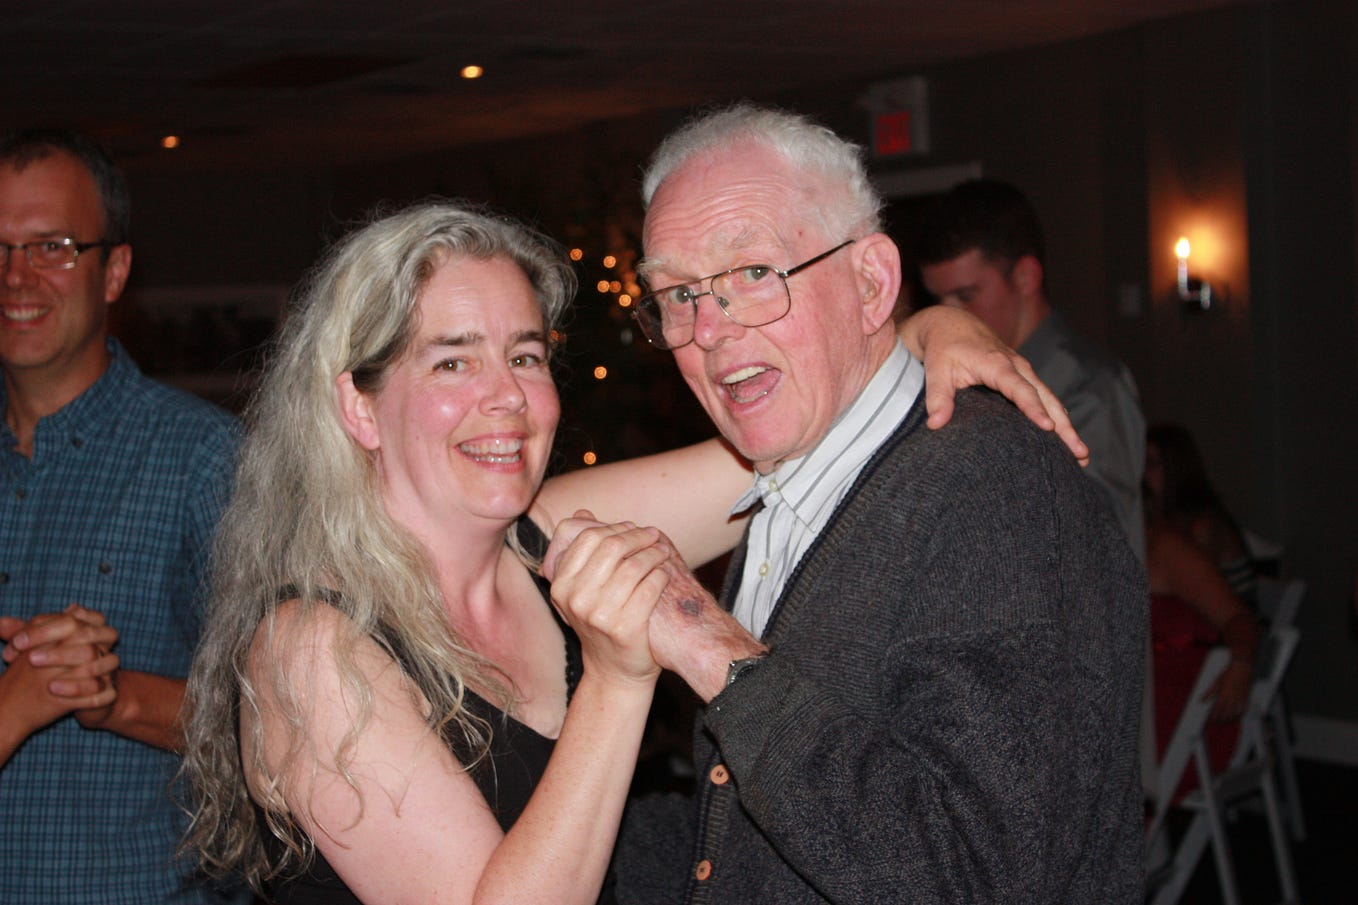 photo of author and her father dancing together at nephew’s wedding — both with happy smiles